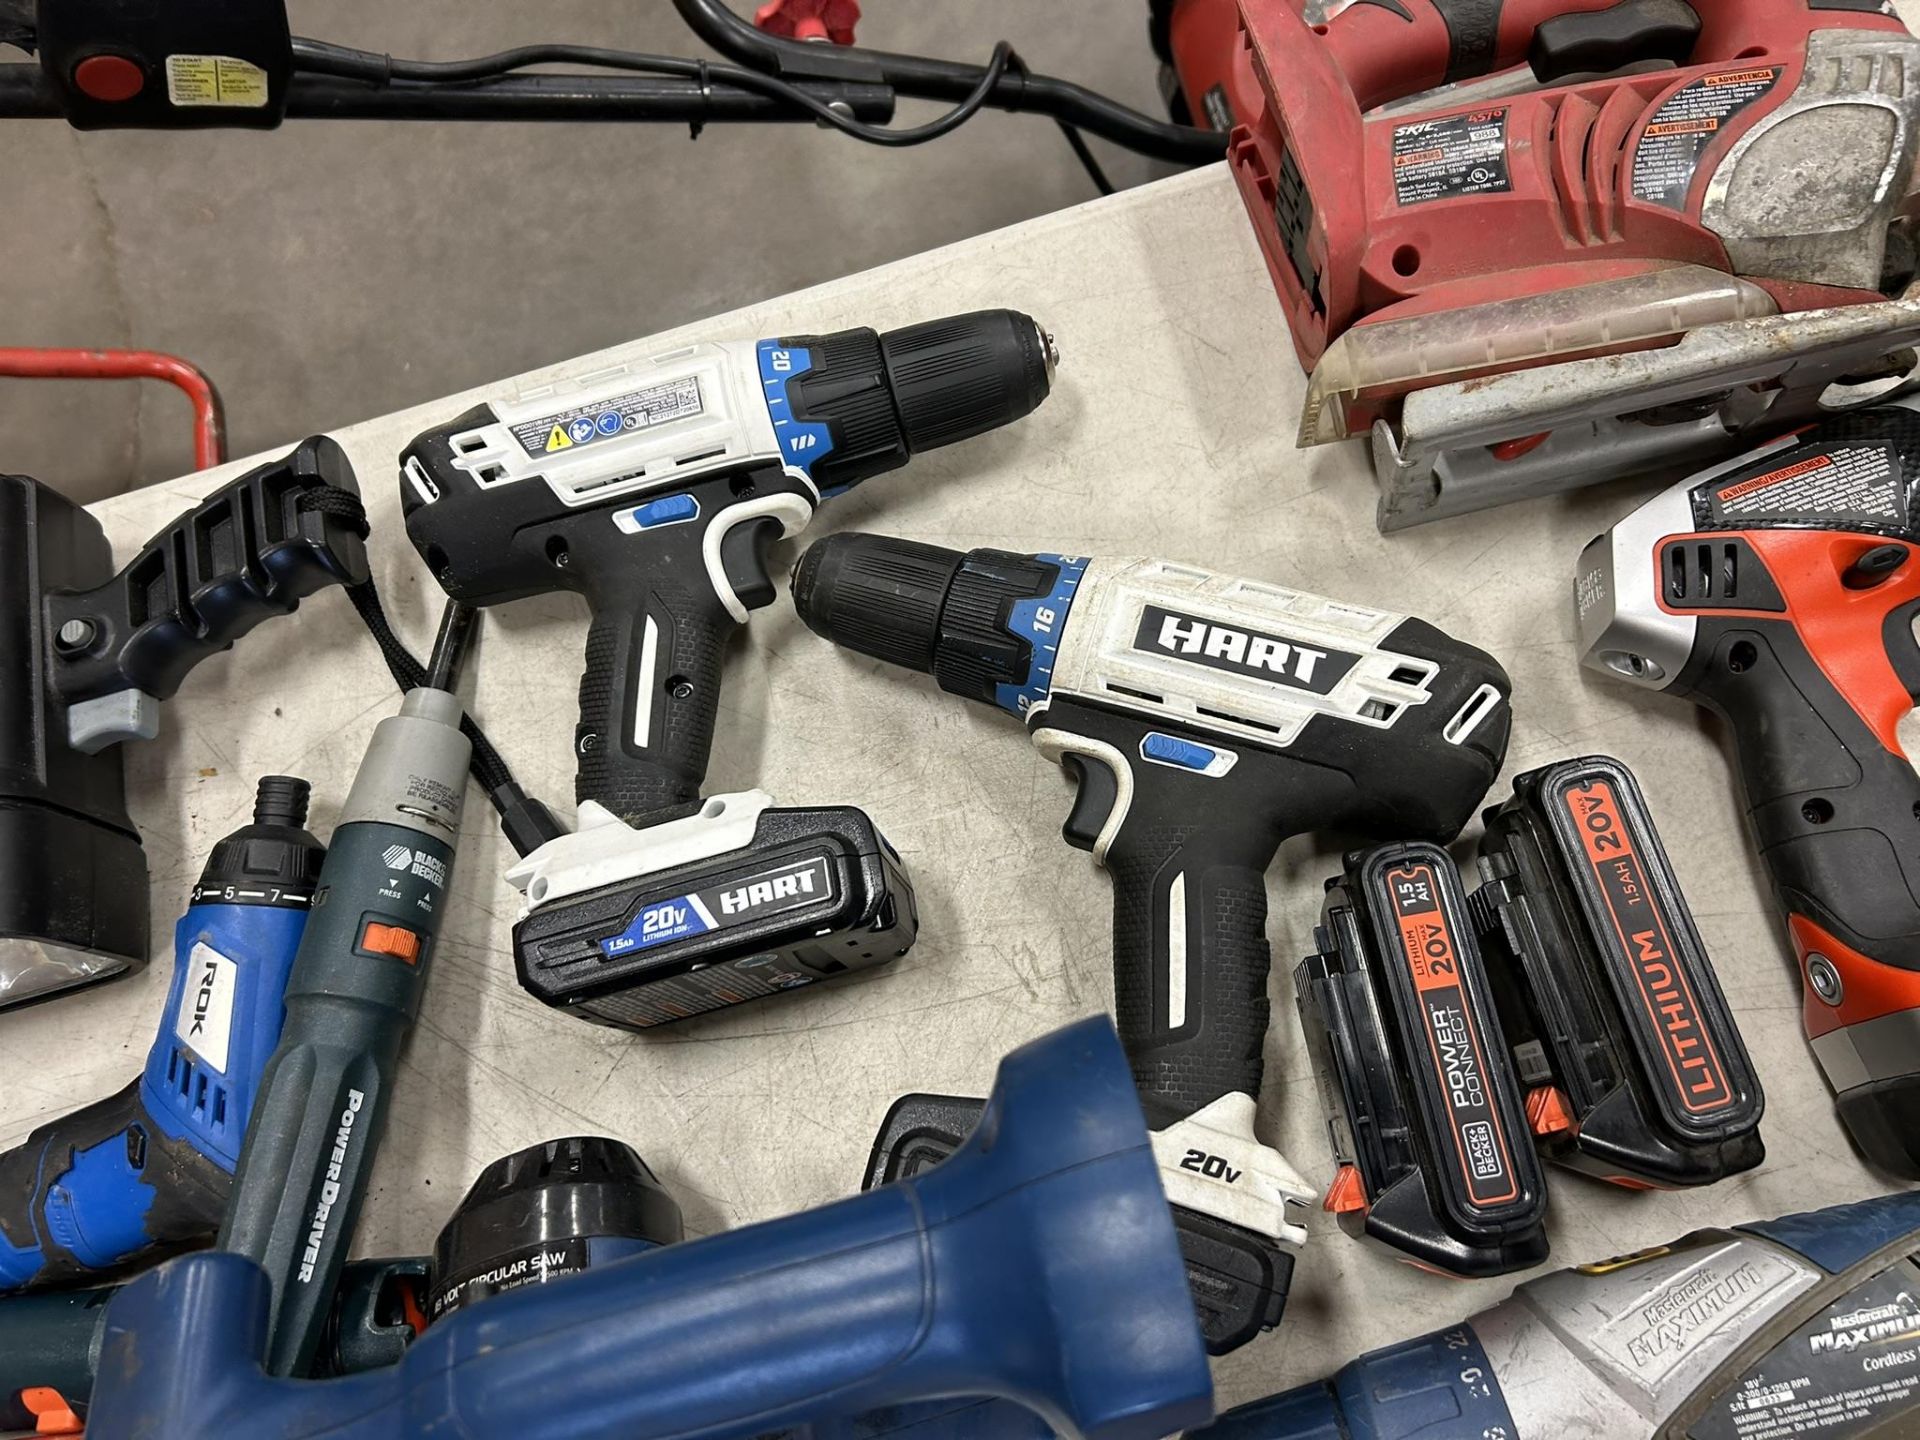 L/O ASSORTED CORDLESS POWER TOOLS, ETC. - Image 8 of 15